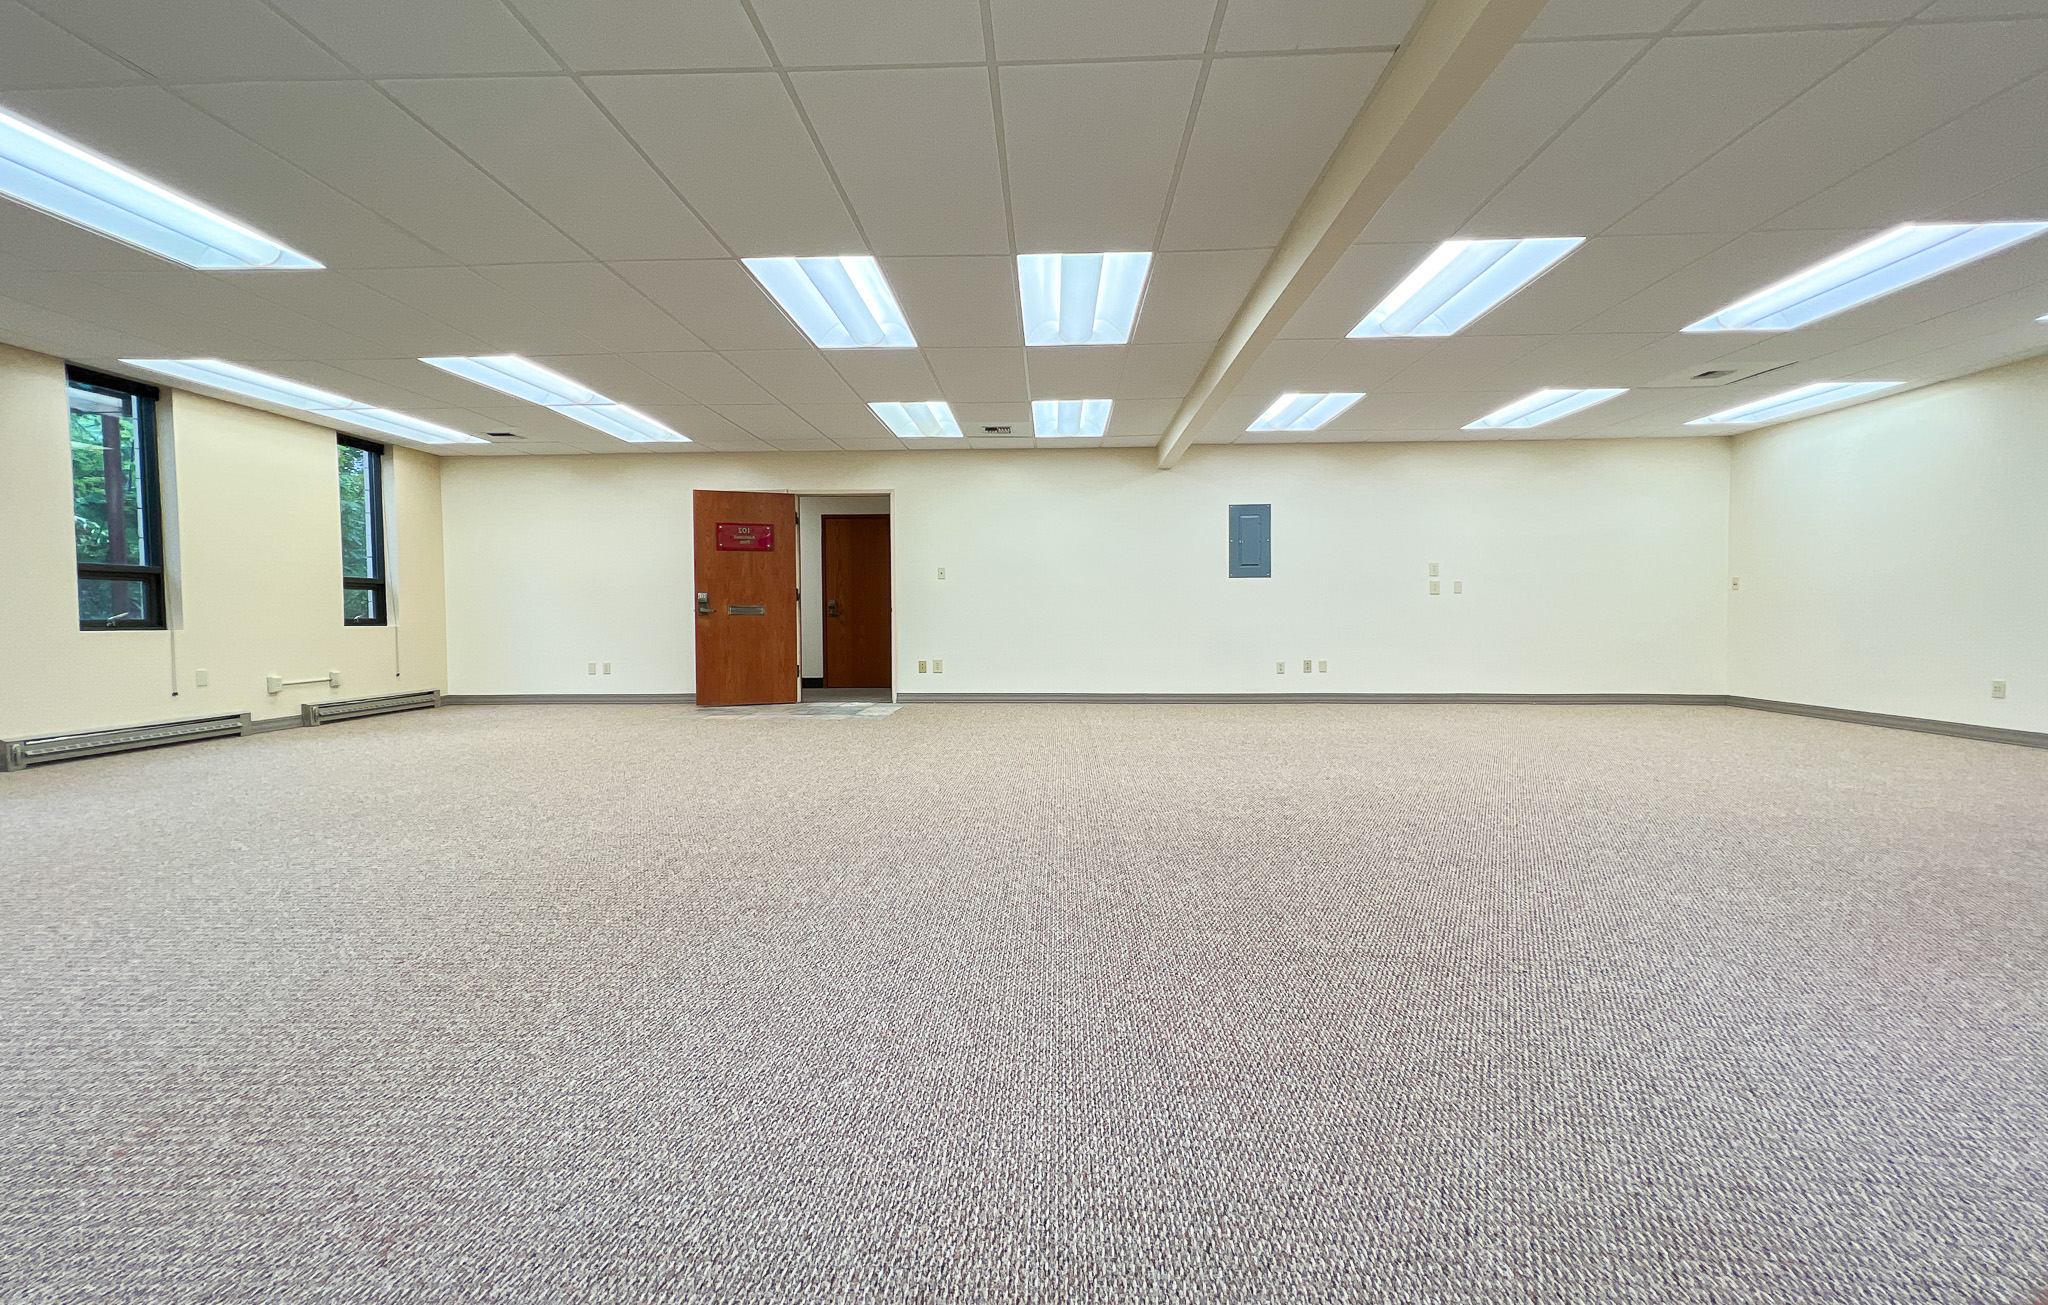 Interior of RSD Properties' Suite 102 in the 750 W 2nd Avenue office commercial office building in Anchorage, Alaska. Two windows on the left, tan carpeting and a drop ceiling with brown exit door center left